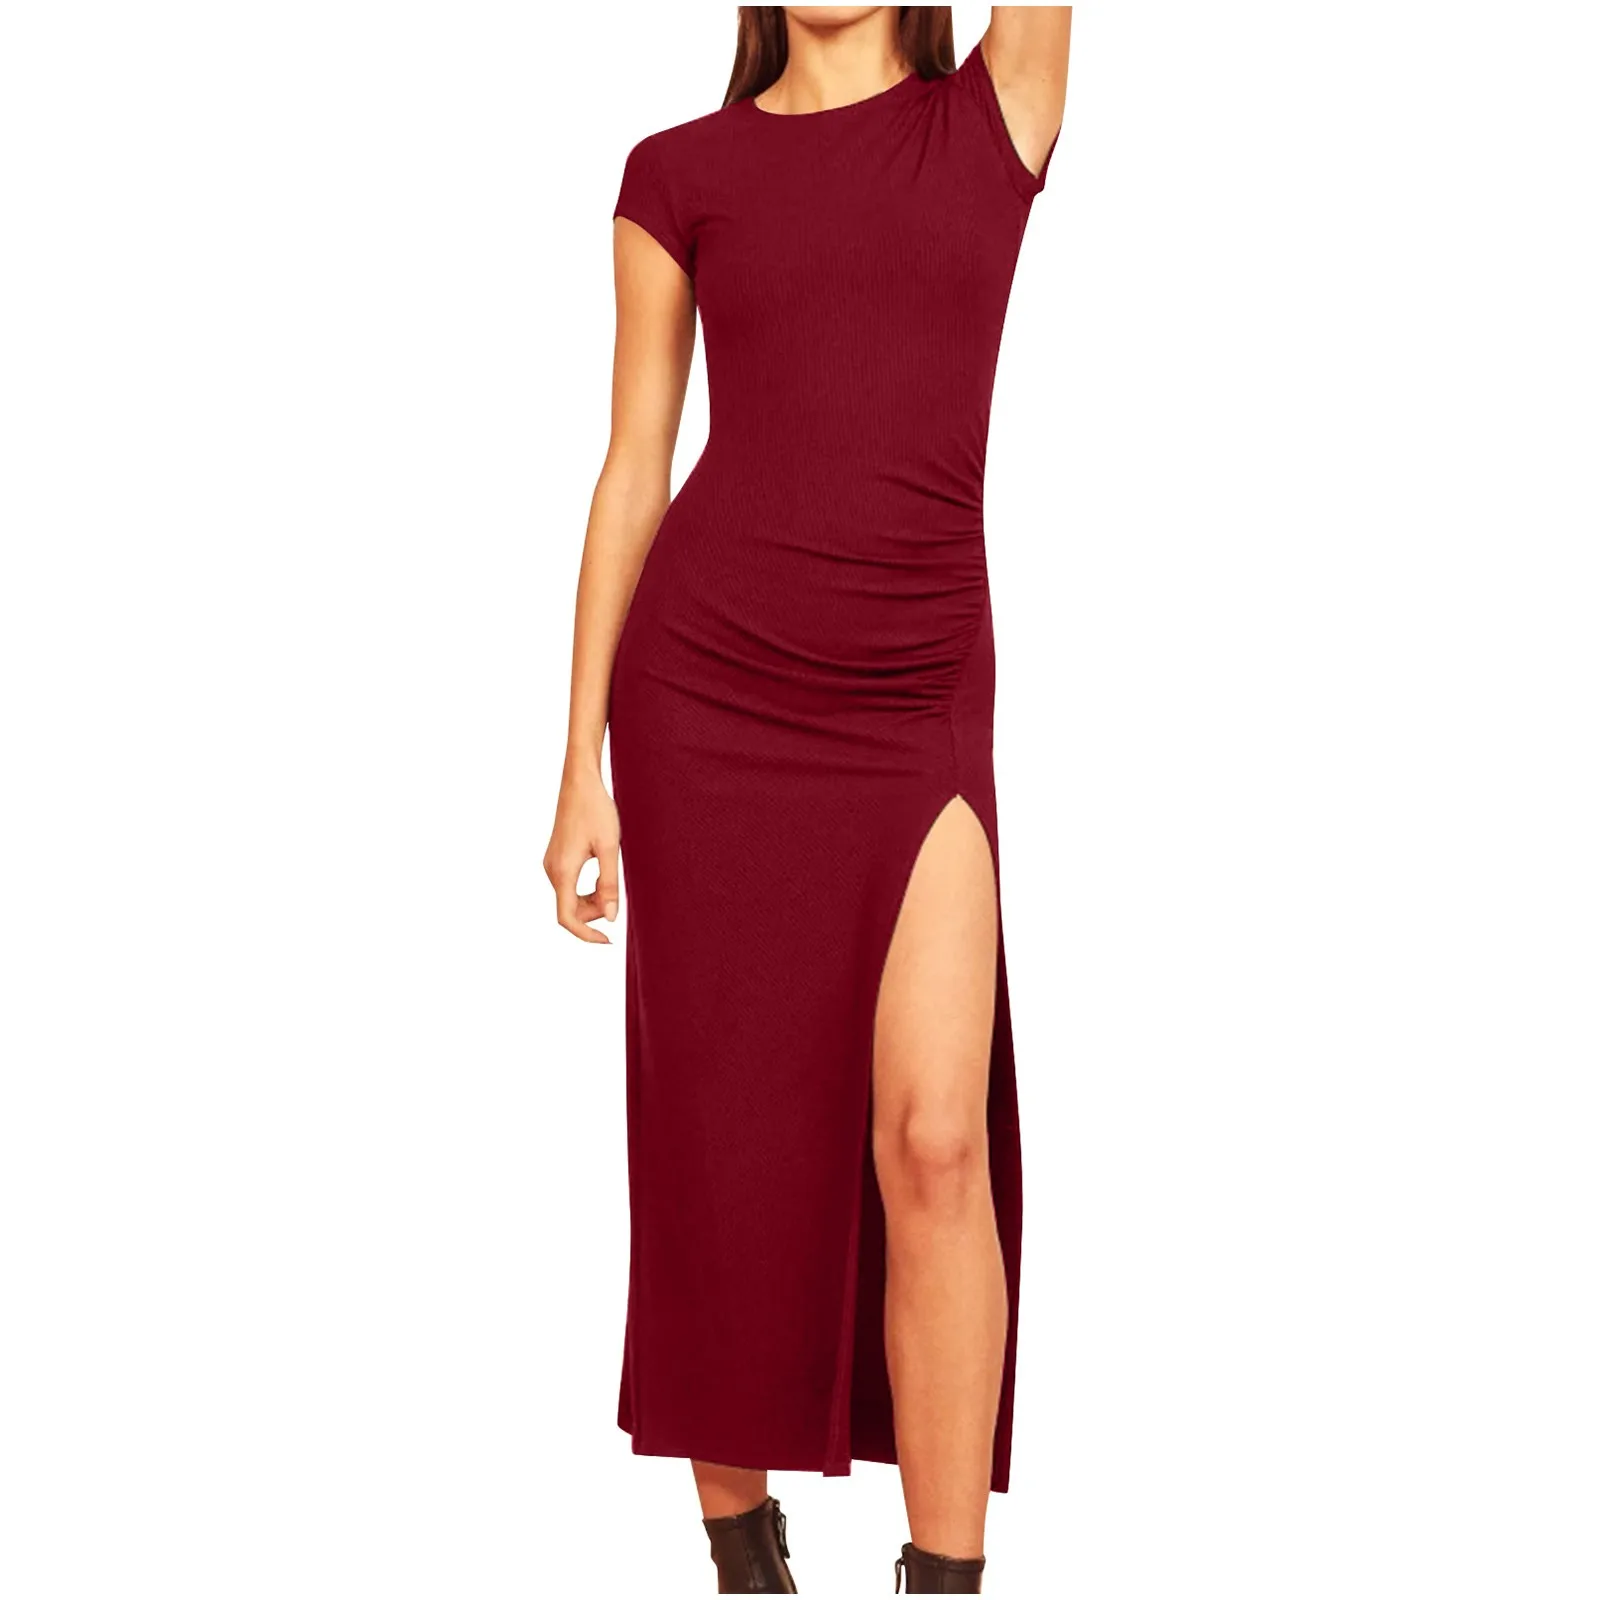 

European And Border New Women's Clothing Mature Sexy Round Neck Bag Hip Slit Solid Color Sleeveless Slim Dress Dress Solid Color